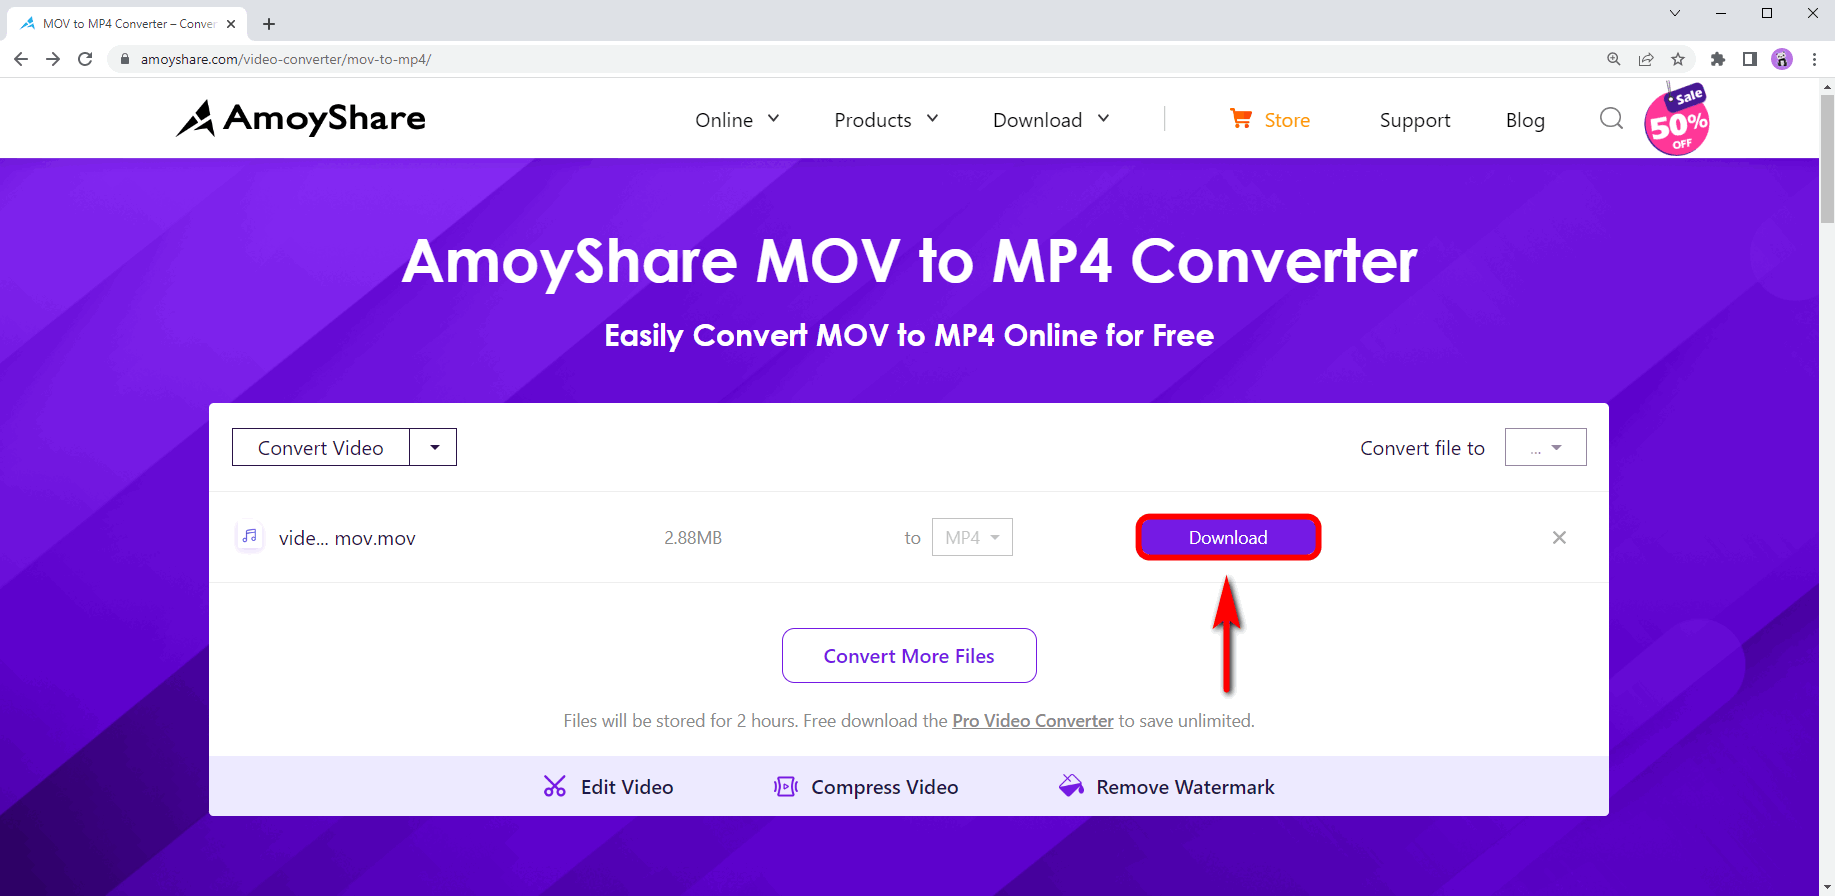 Download the converted MOV file